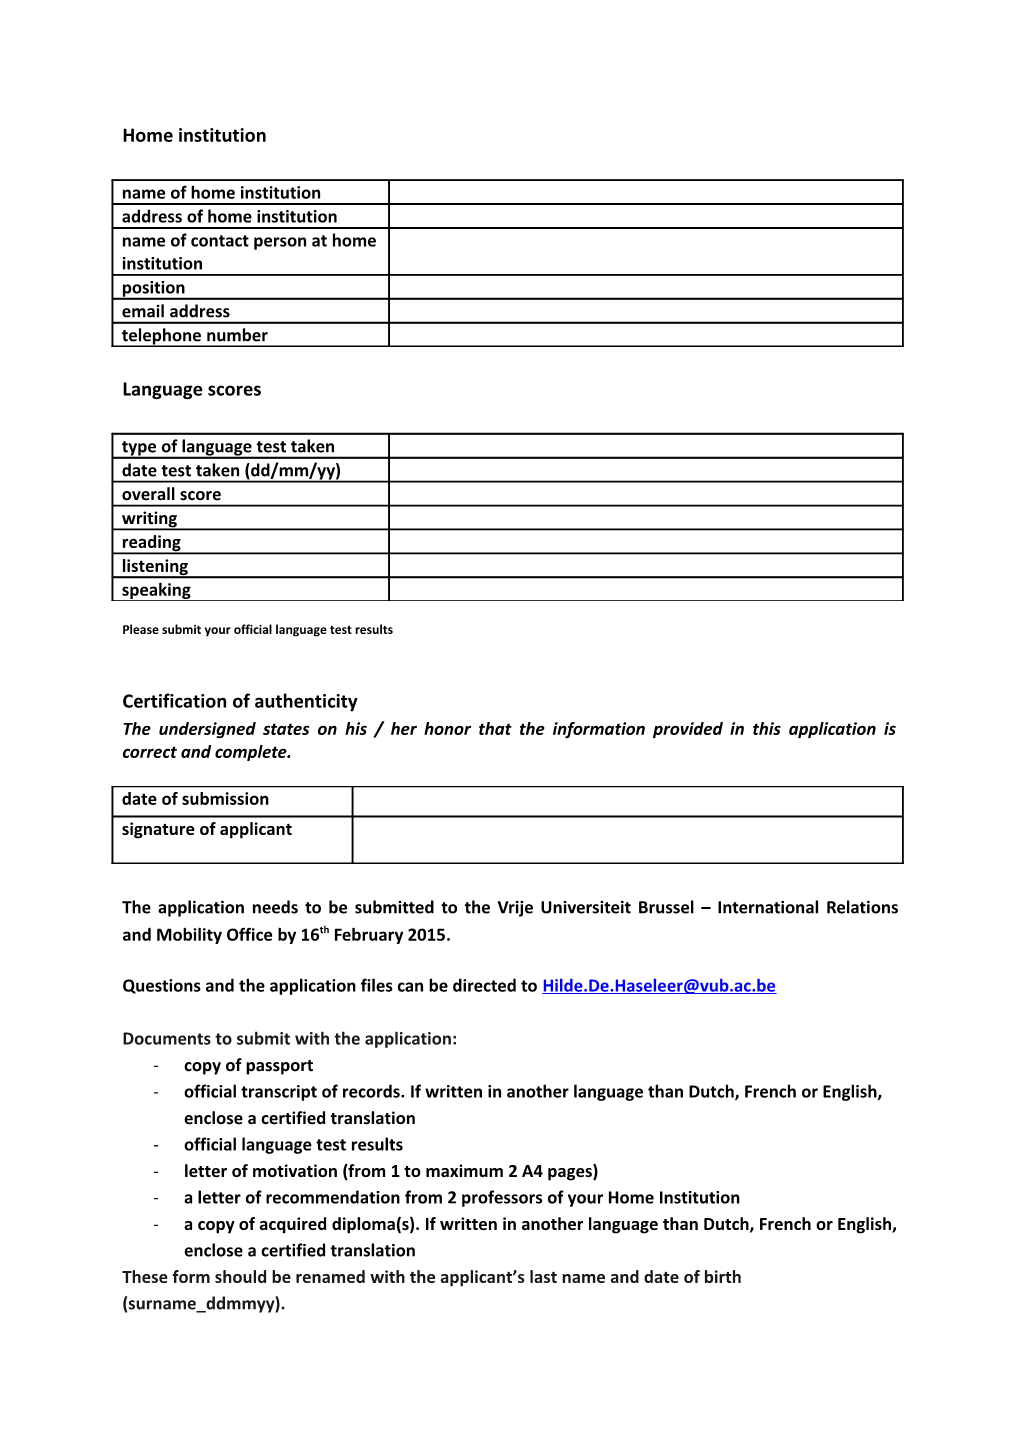 Application Form Academic Year 2015-16